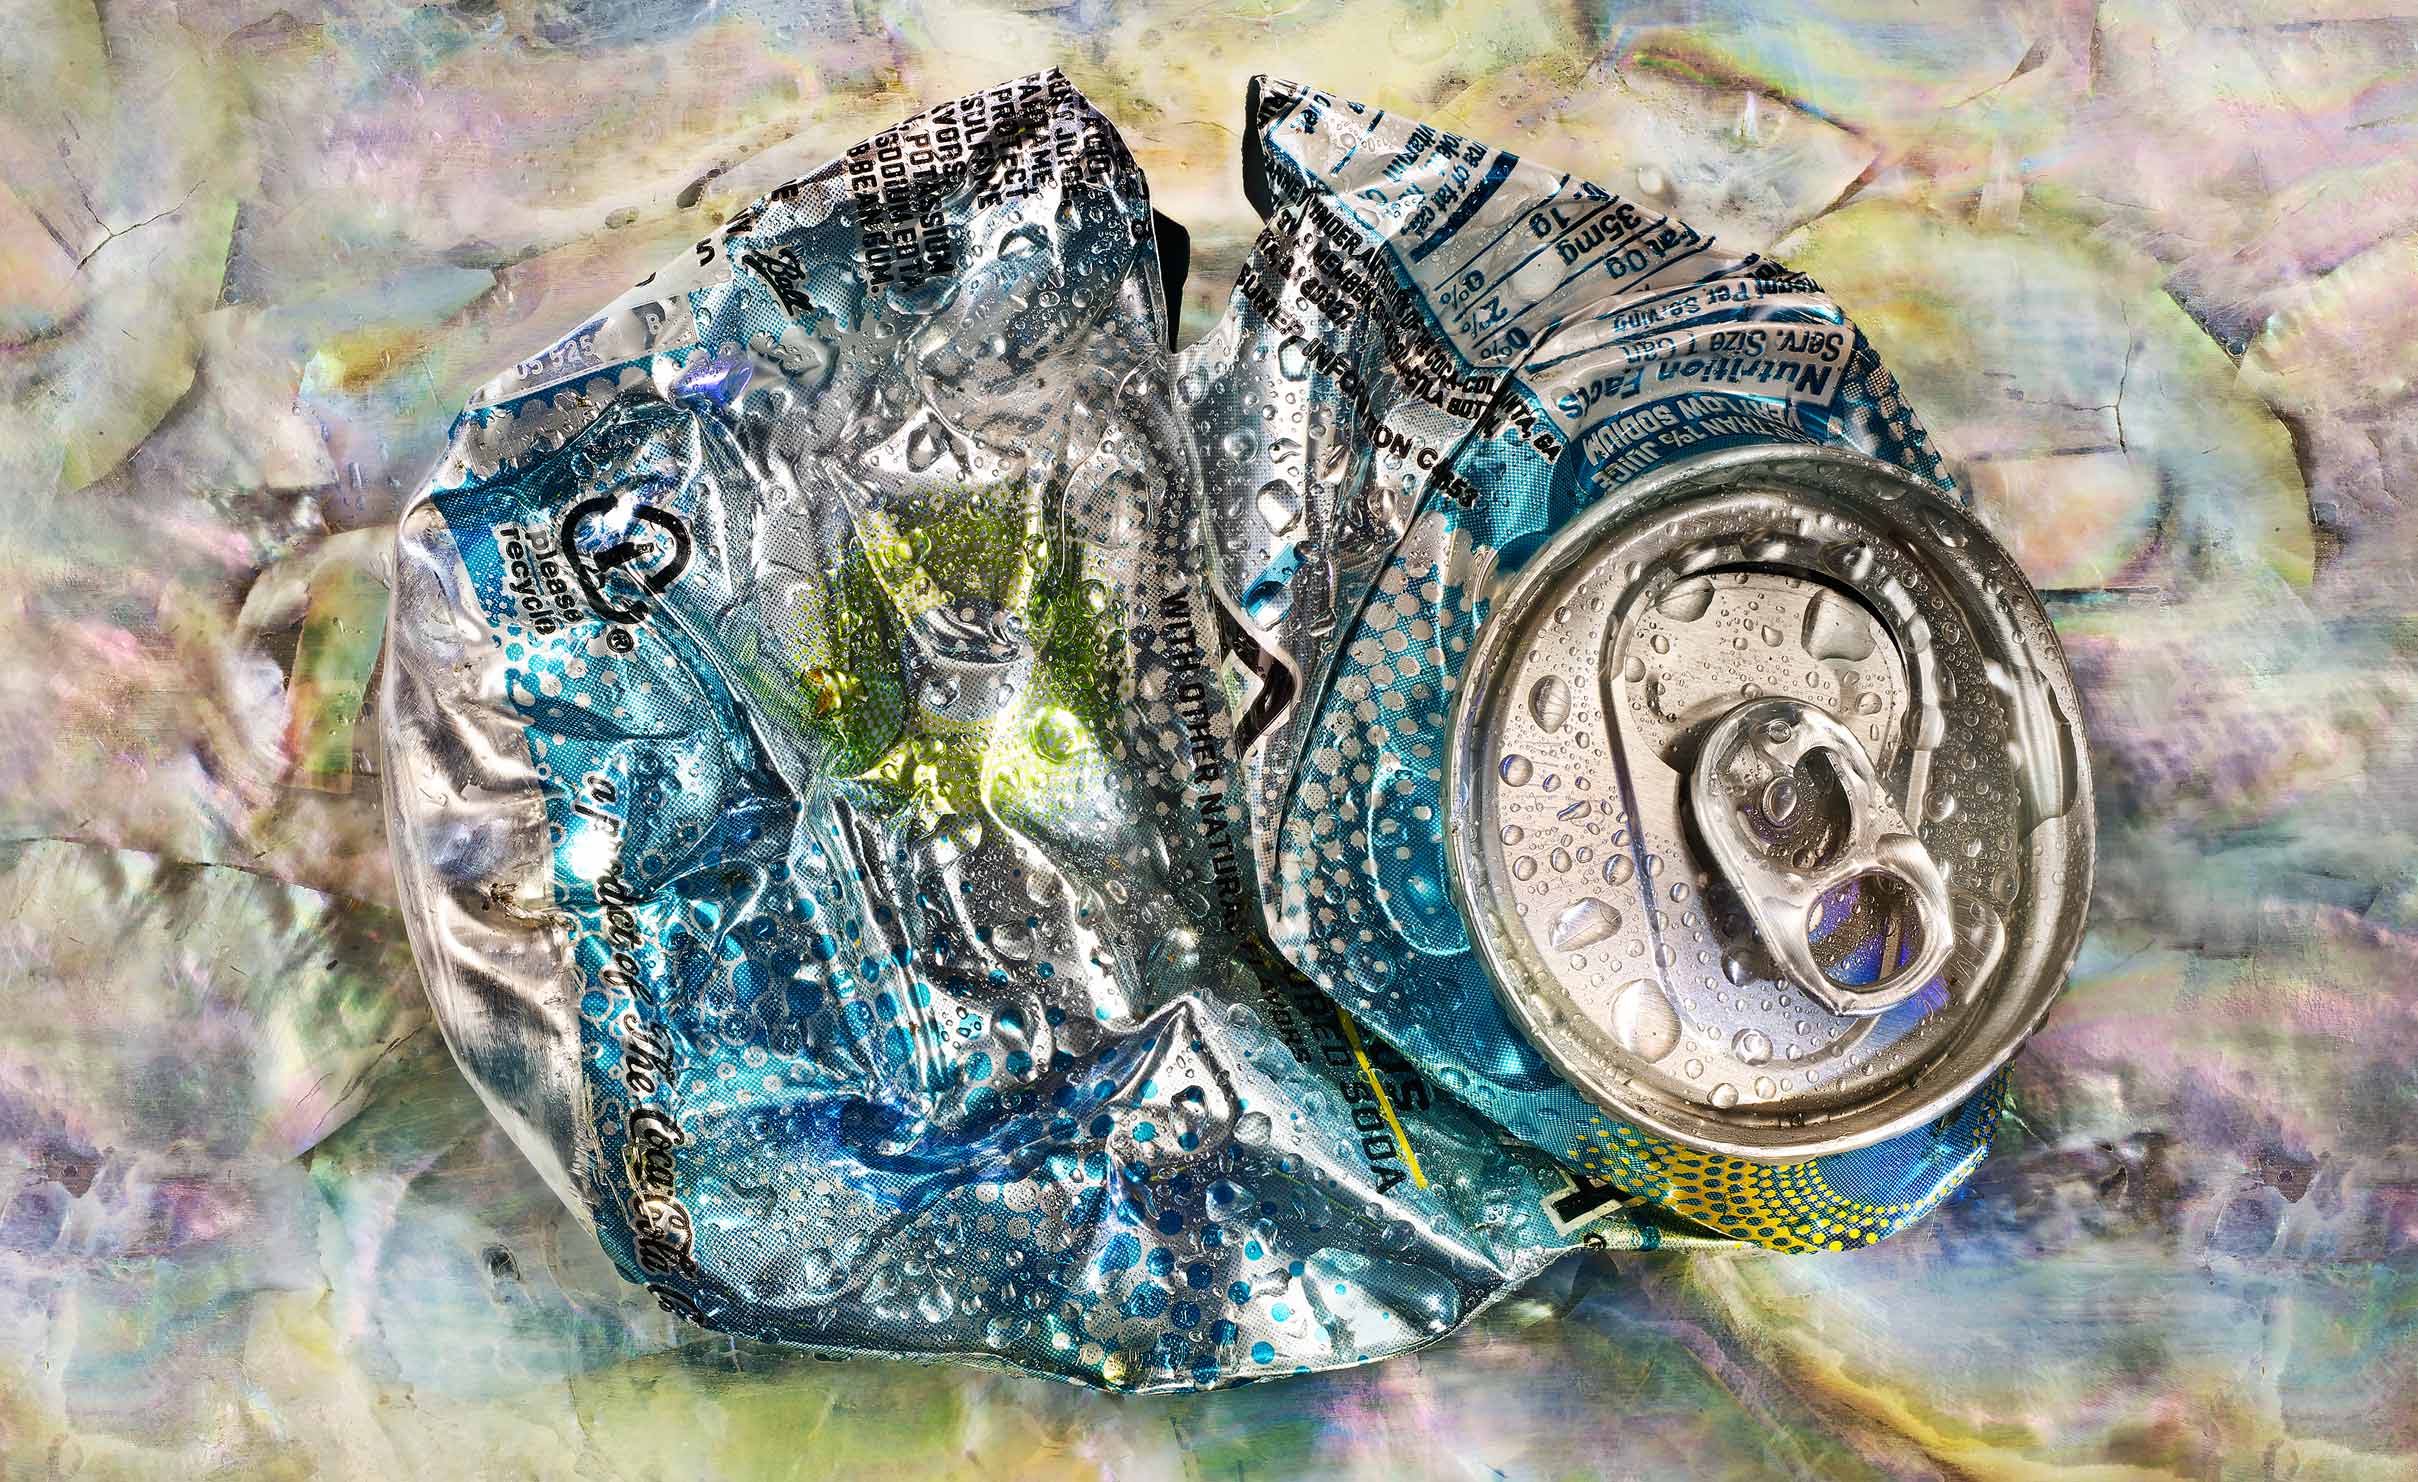 Crushed Fresca can still life photo